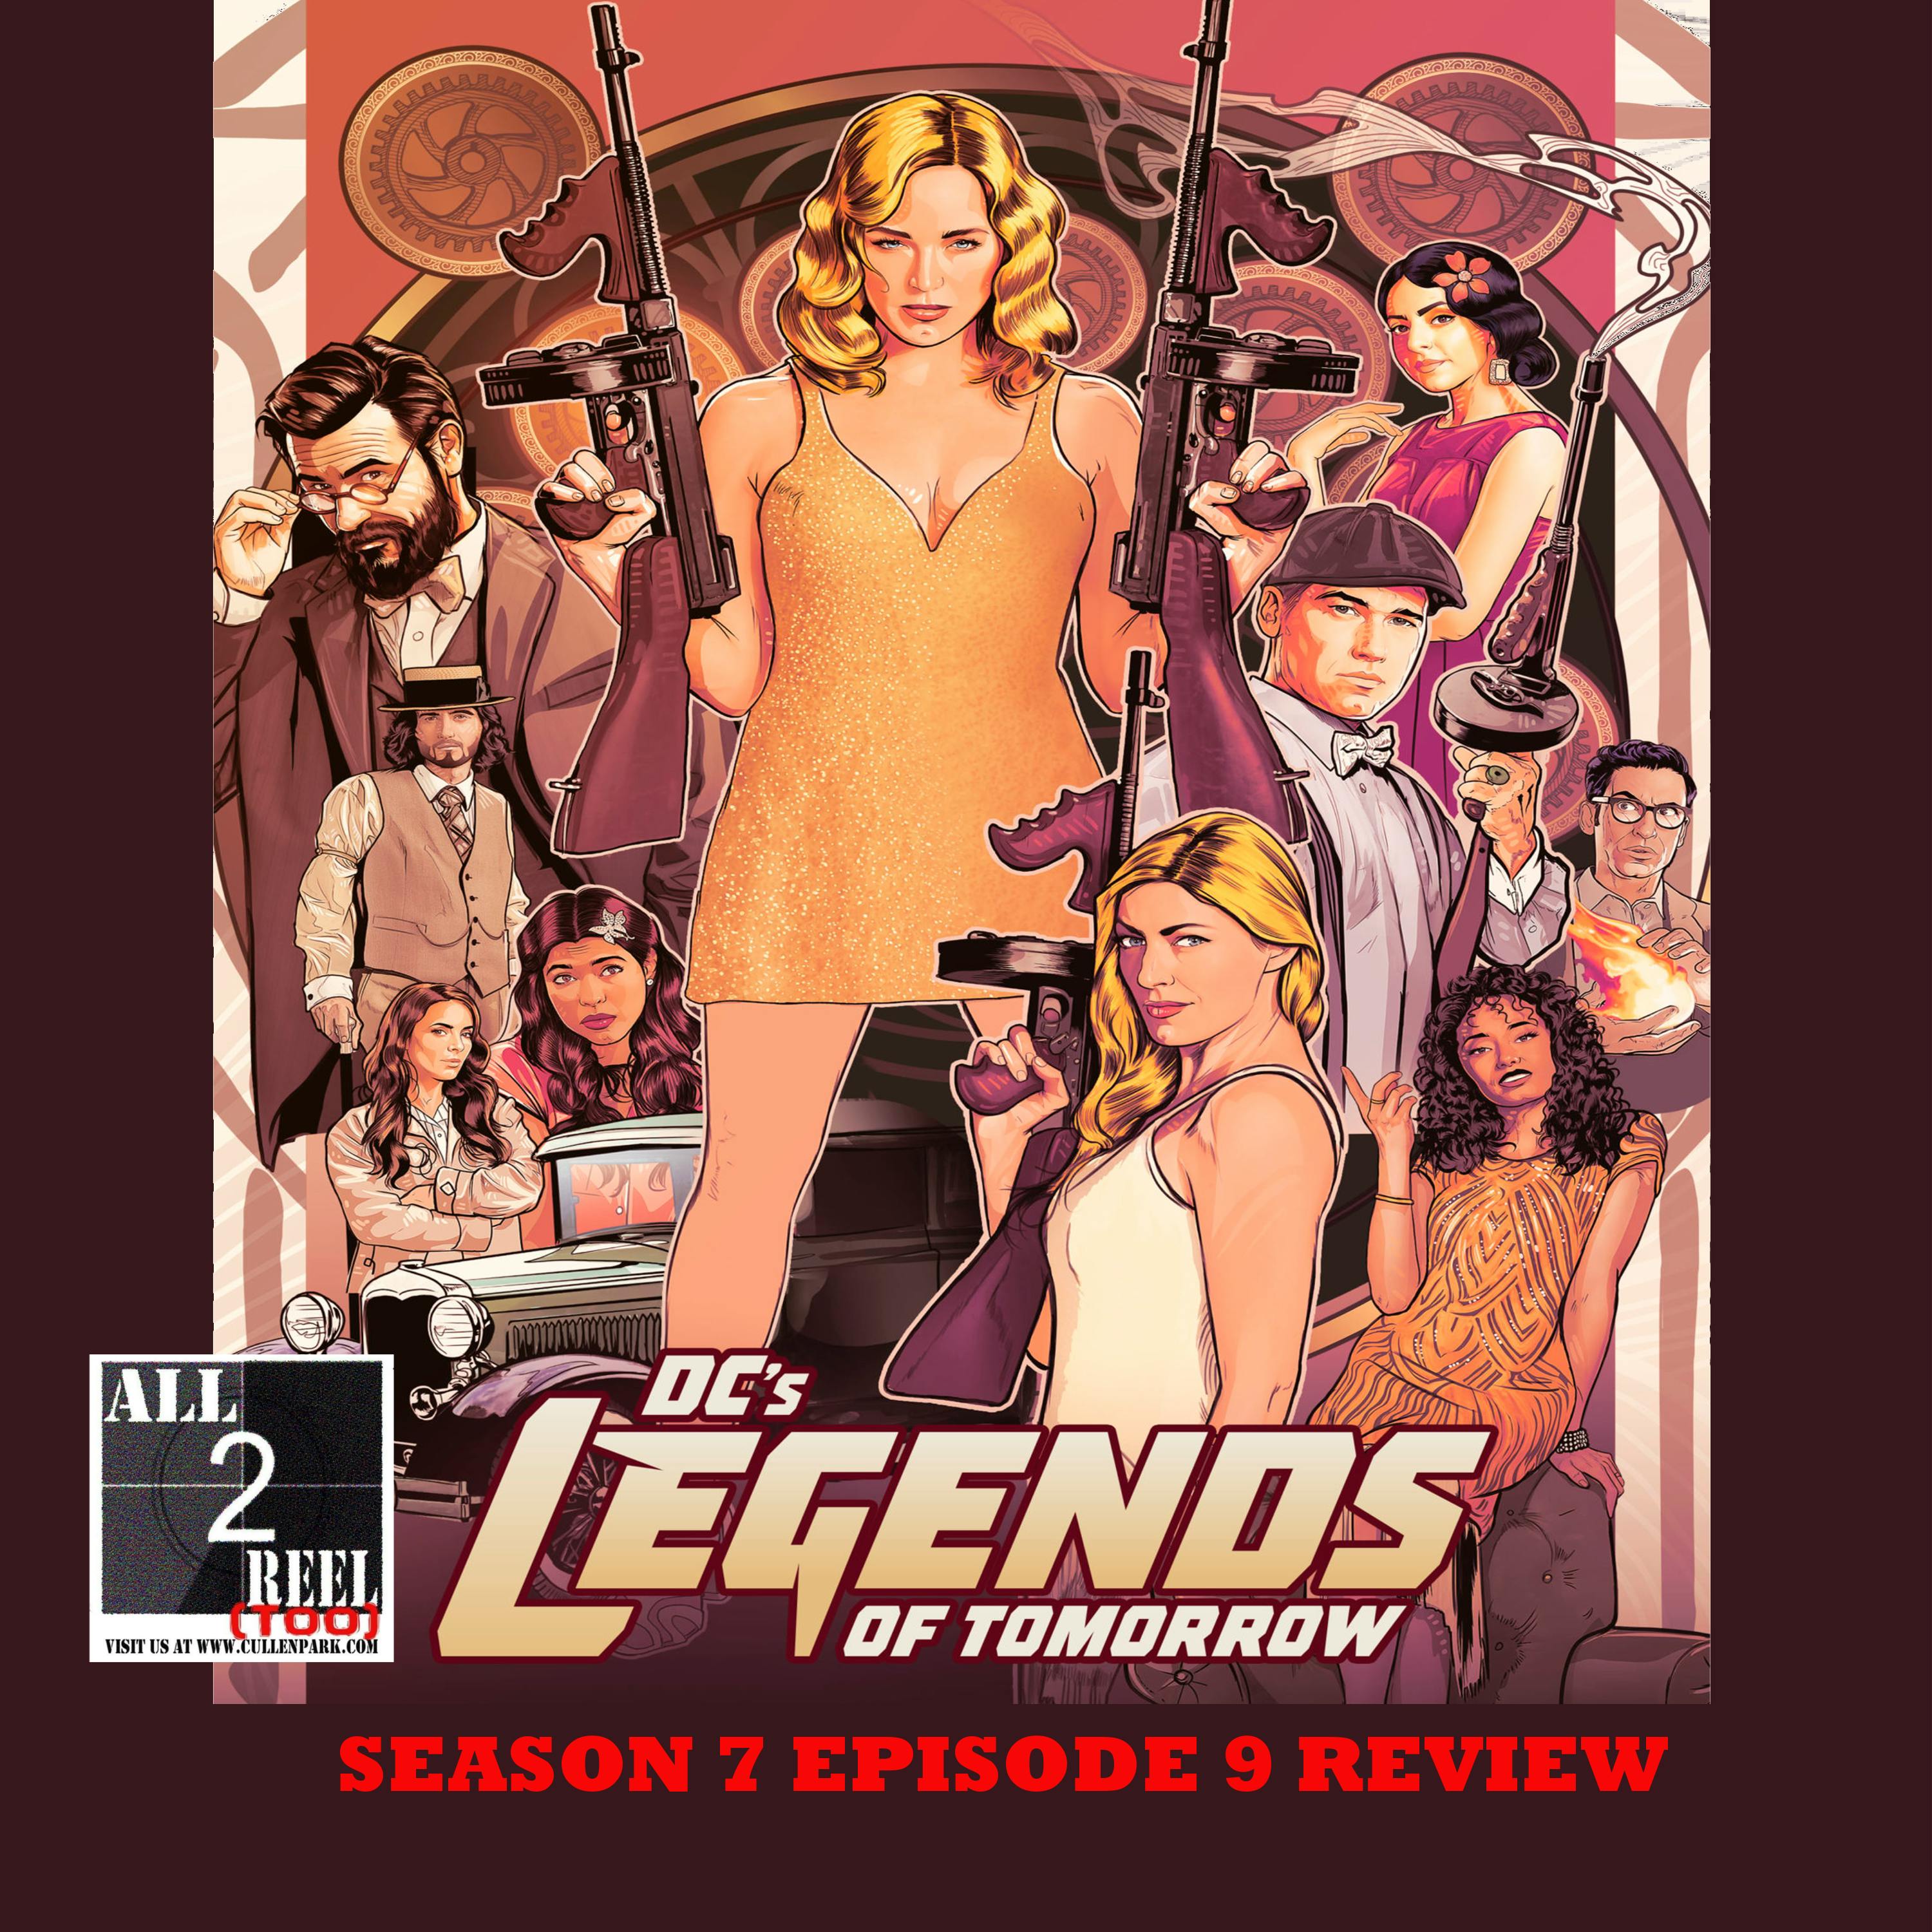 DC’s Legends of Tomorrow SEASON 7 EPISODE 9 REVIEW